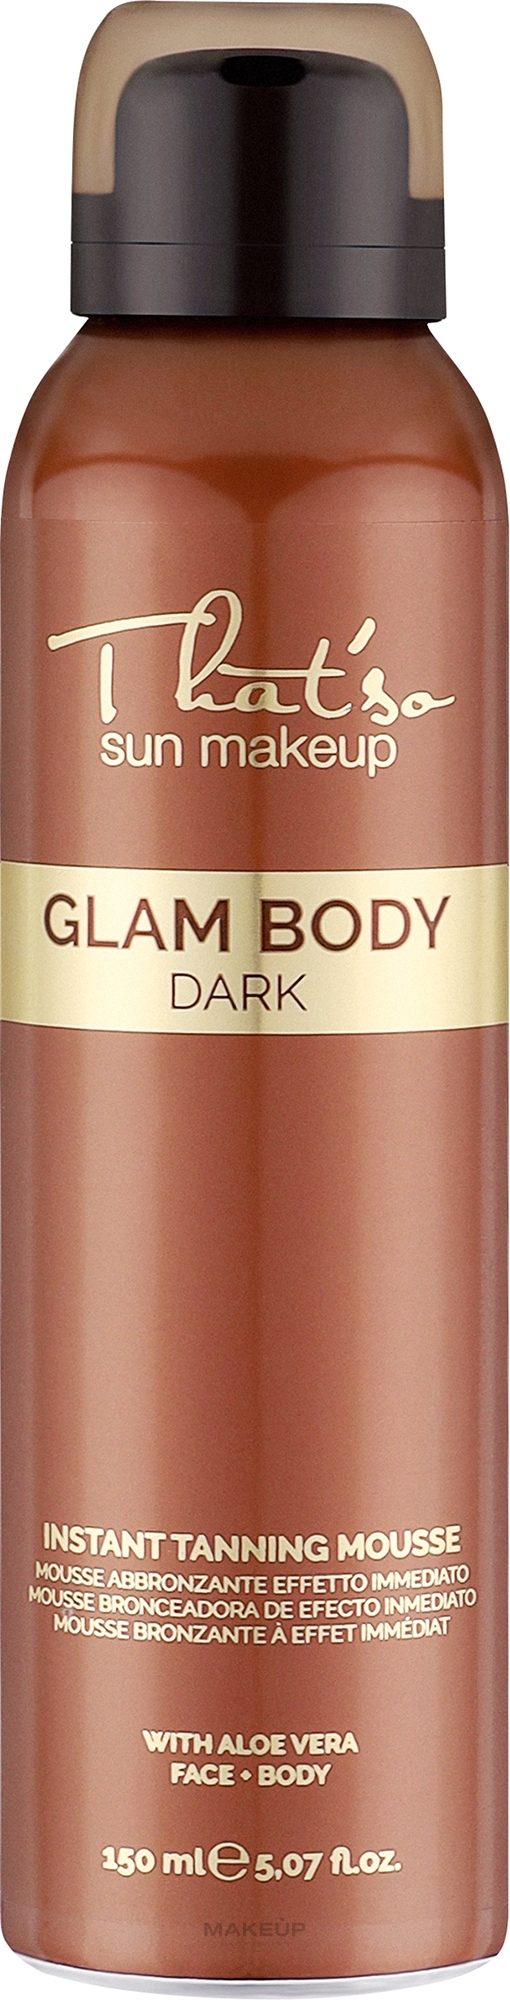 Self-Tanning Mousse for Glamorous Bronze Tan, dark - That's So Glam Body Mousse — photo 150 ml